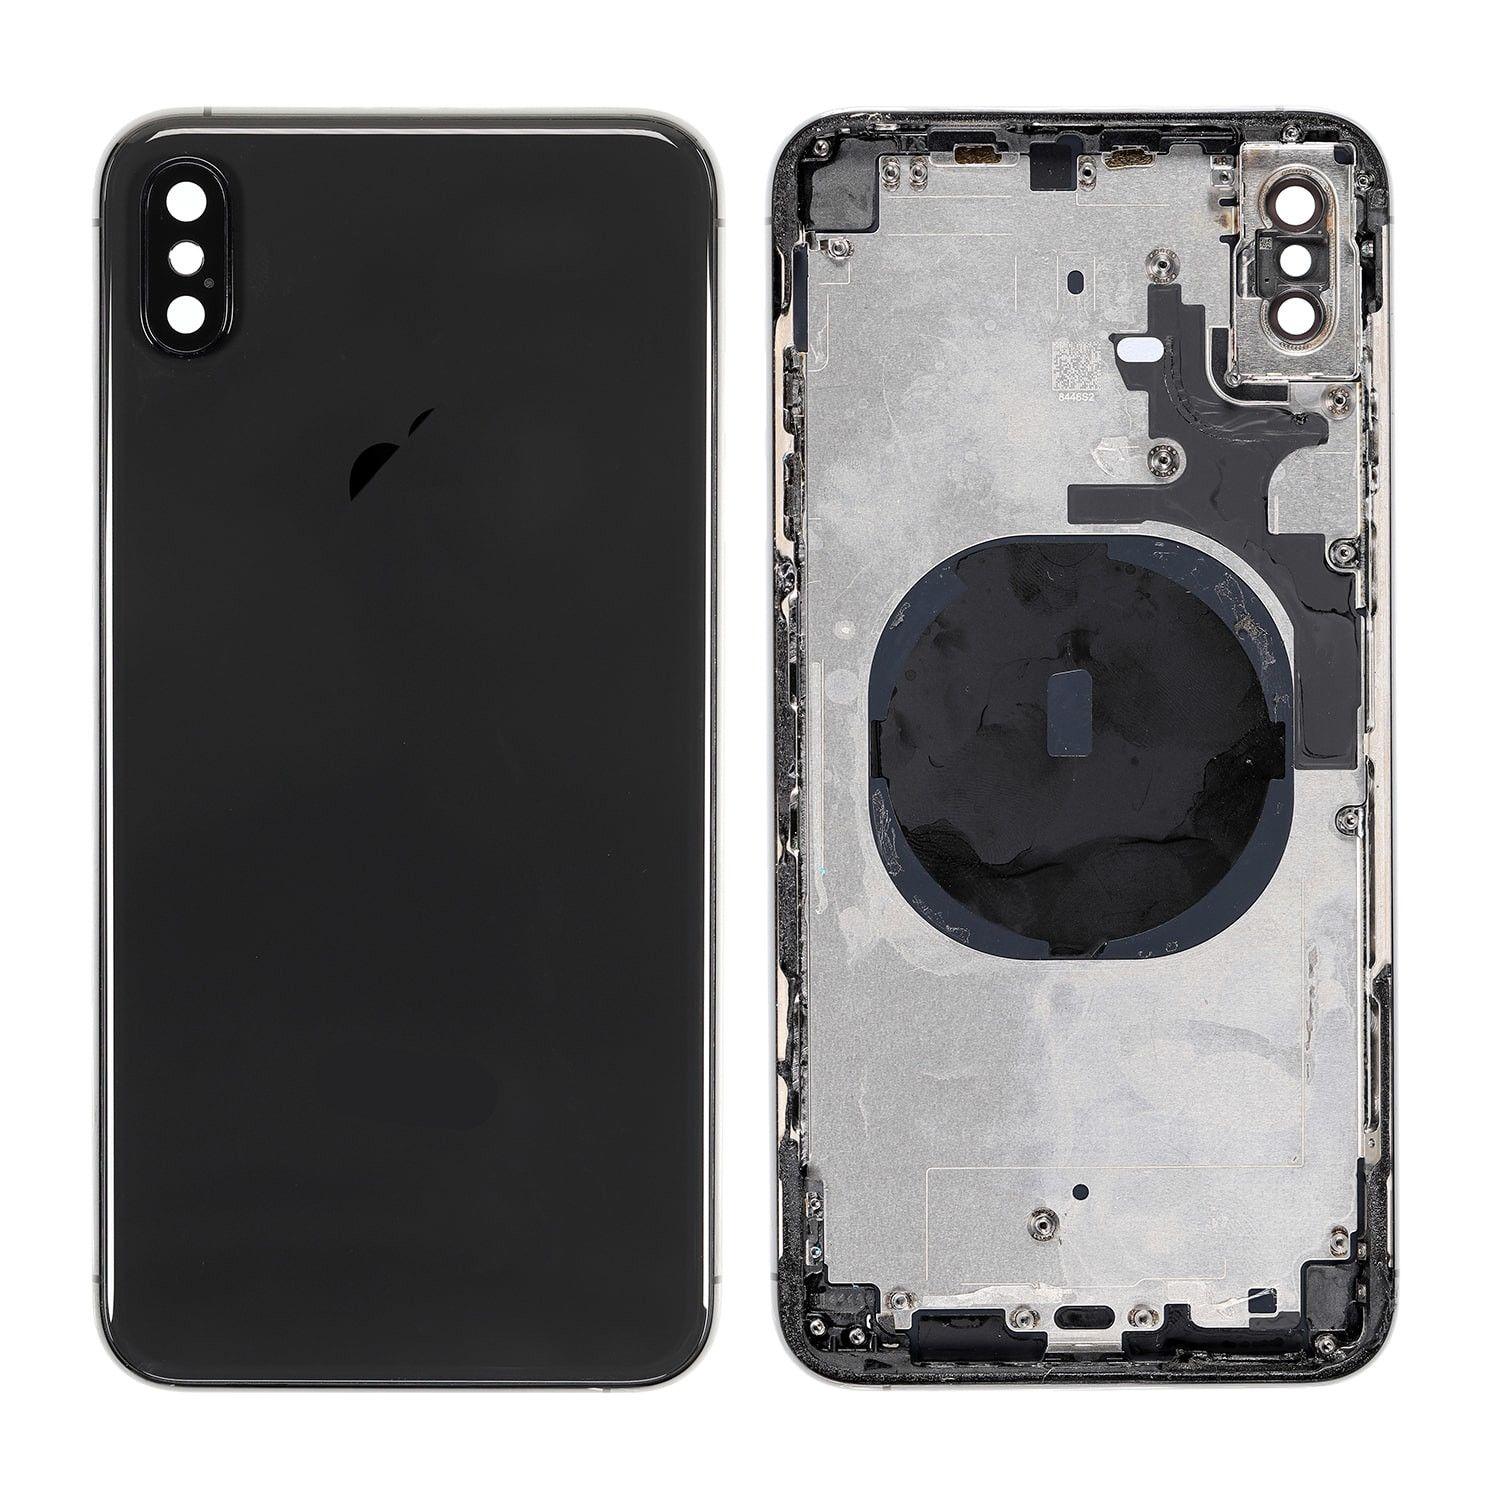 Body for iPhone Xs Max + back cover black